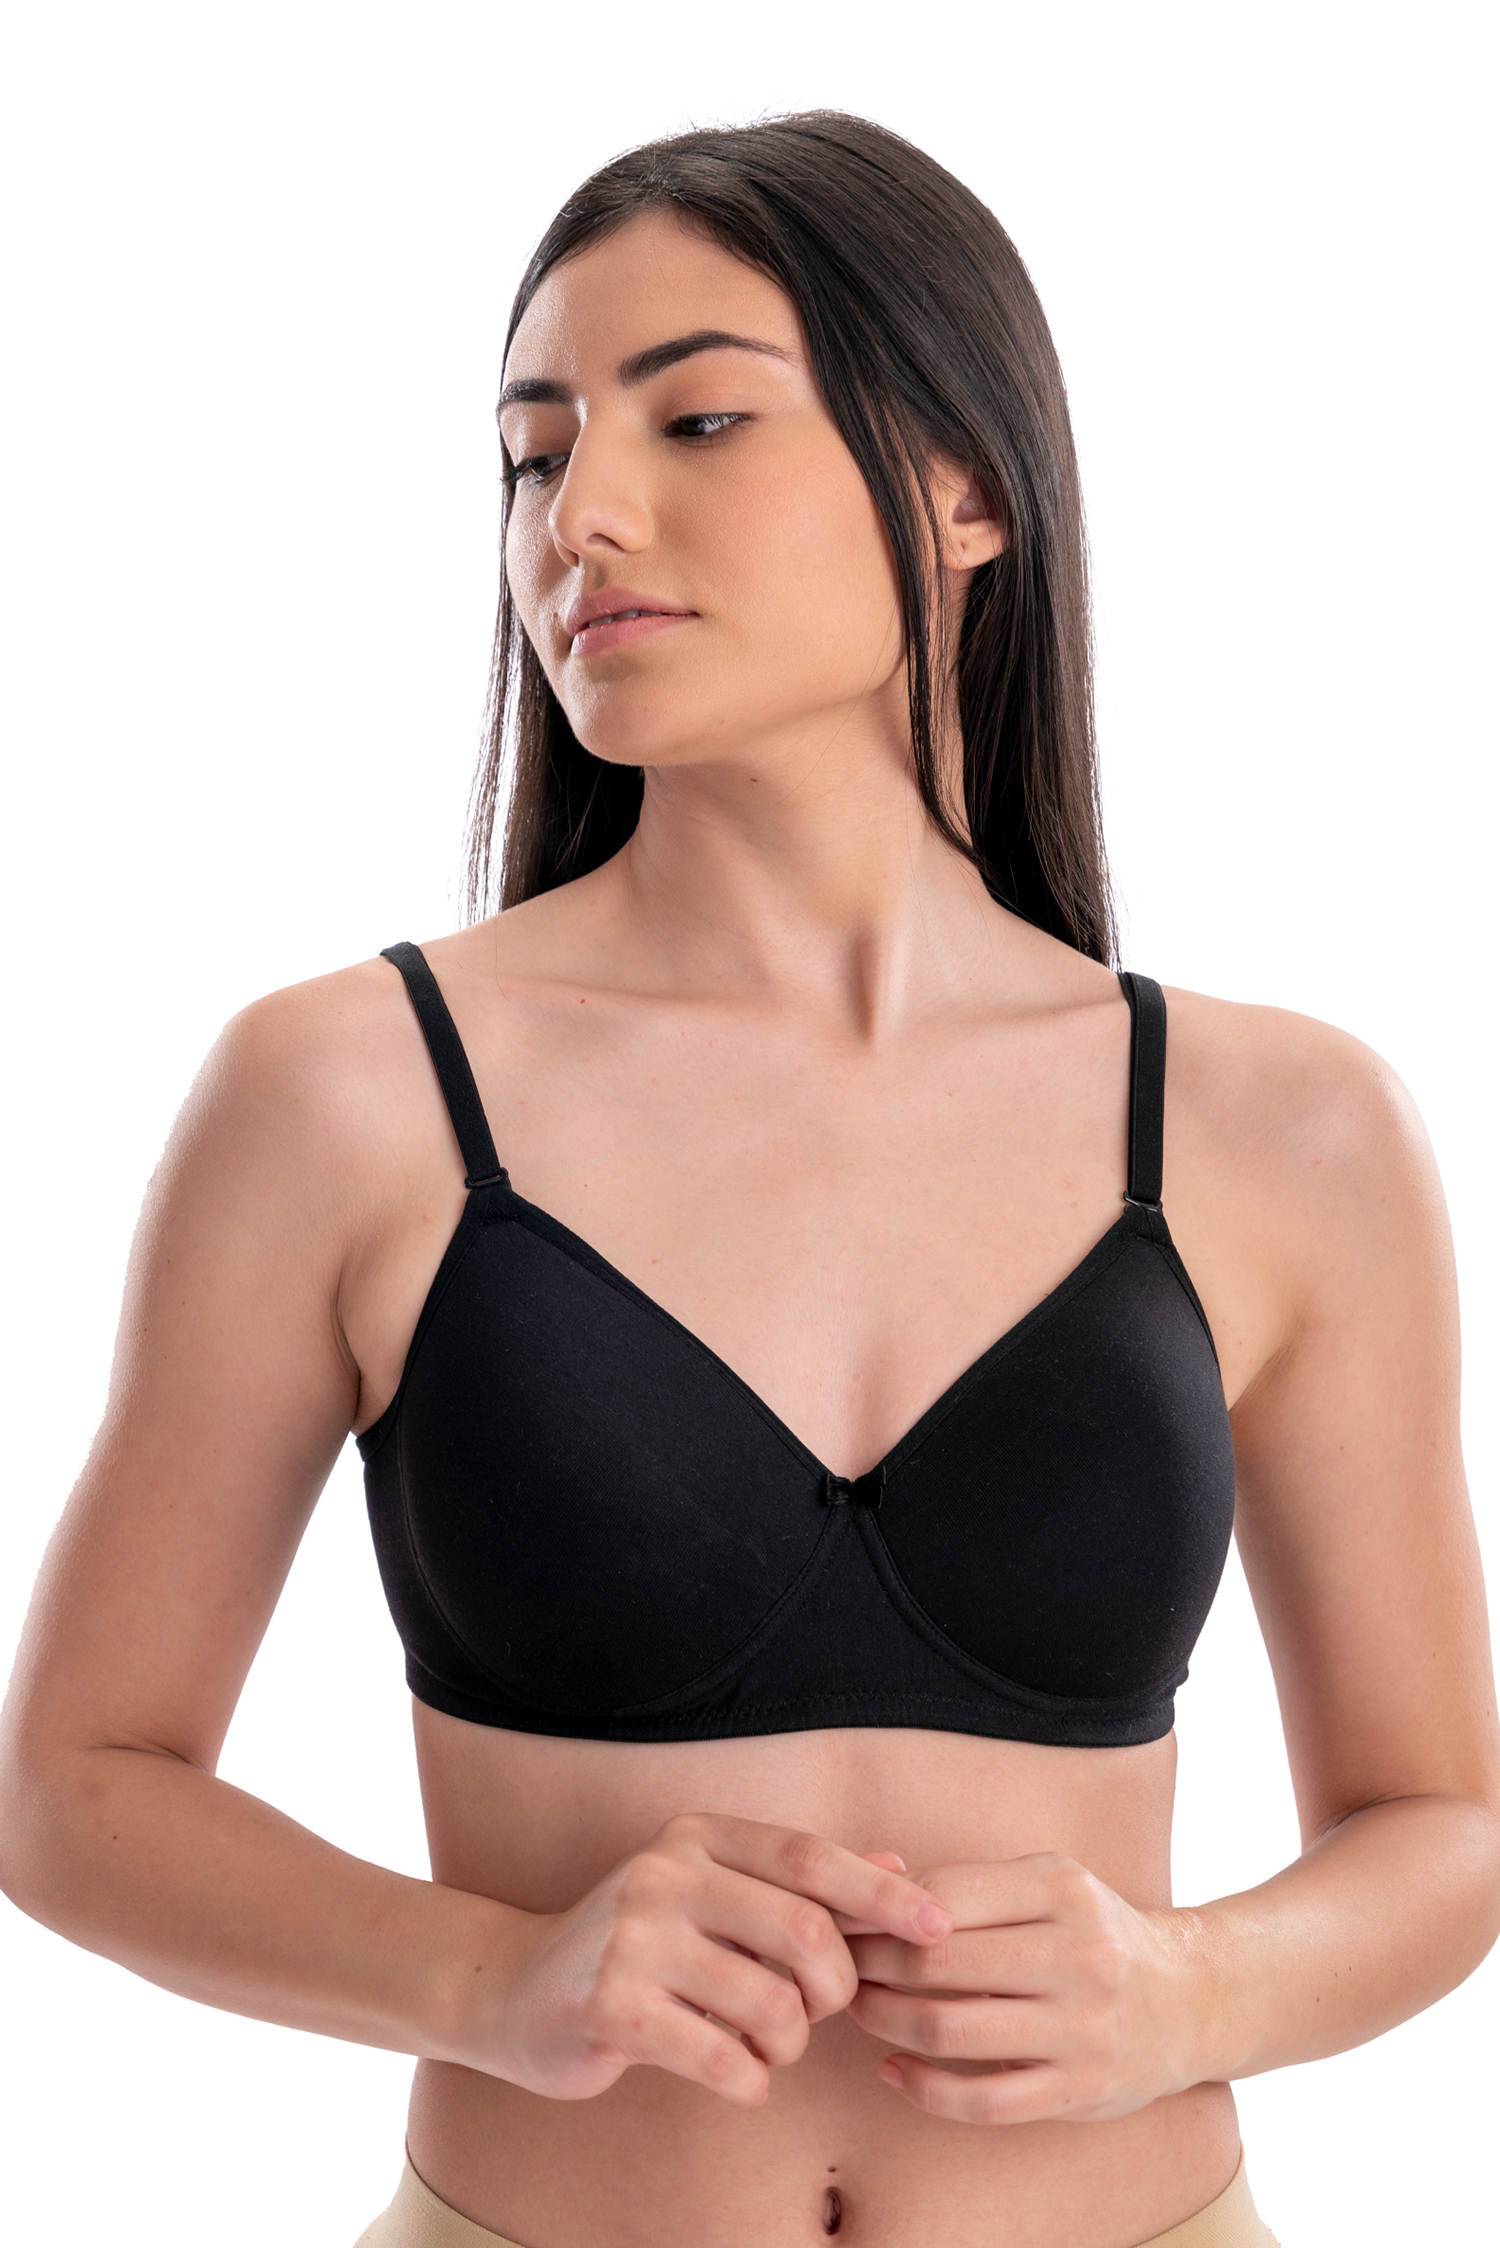 CLASSY BLACK PADDED NON WIRED 3/4TH COVERAGE T-SHIRT BRA